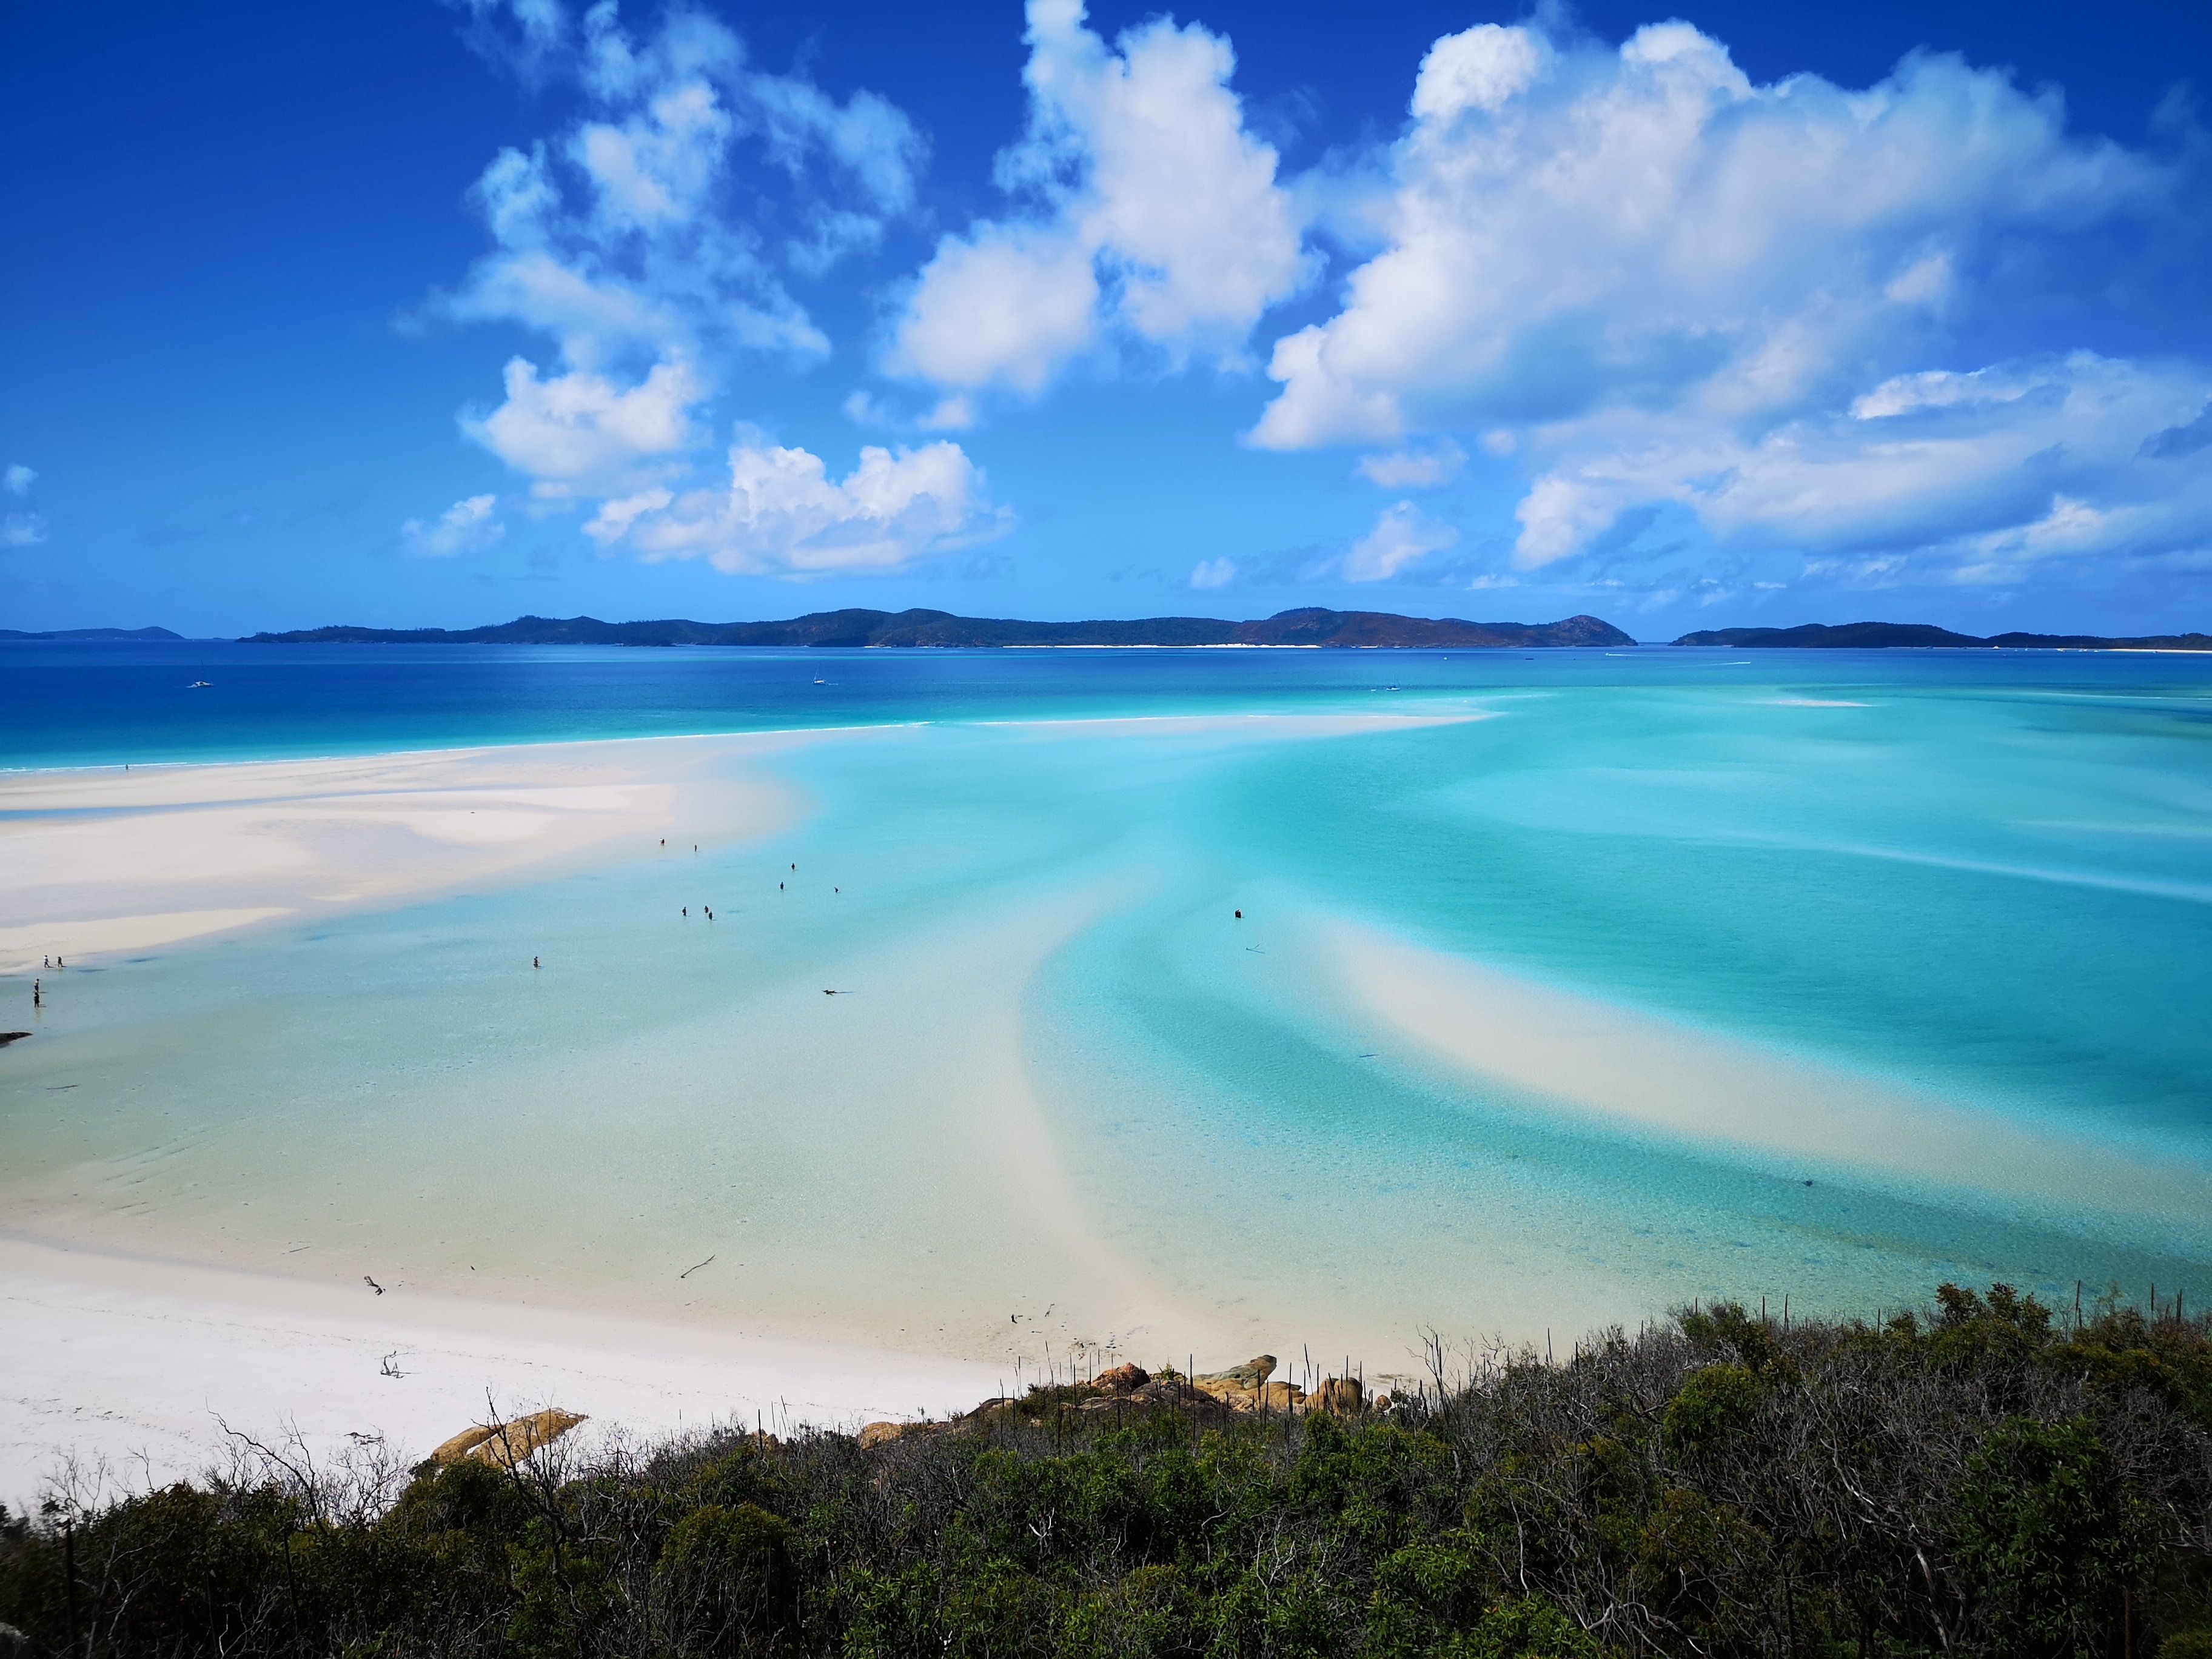 10 Things To Do In Whitsunday Islands: Complete Guide To The Heart Reef &  More At This Ocean Oasis